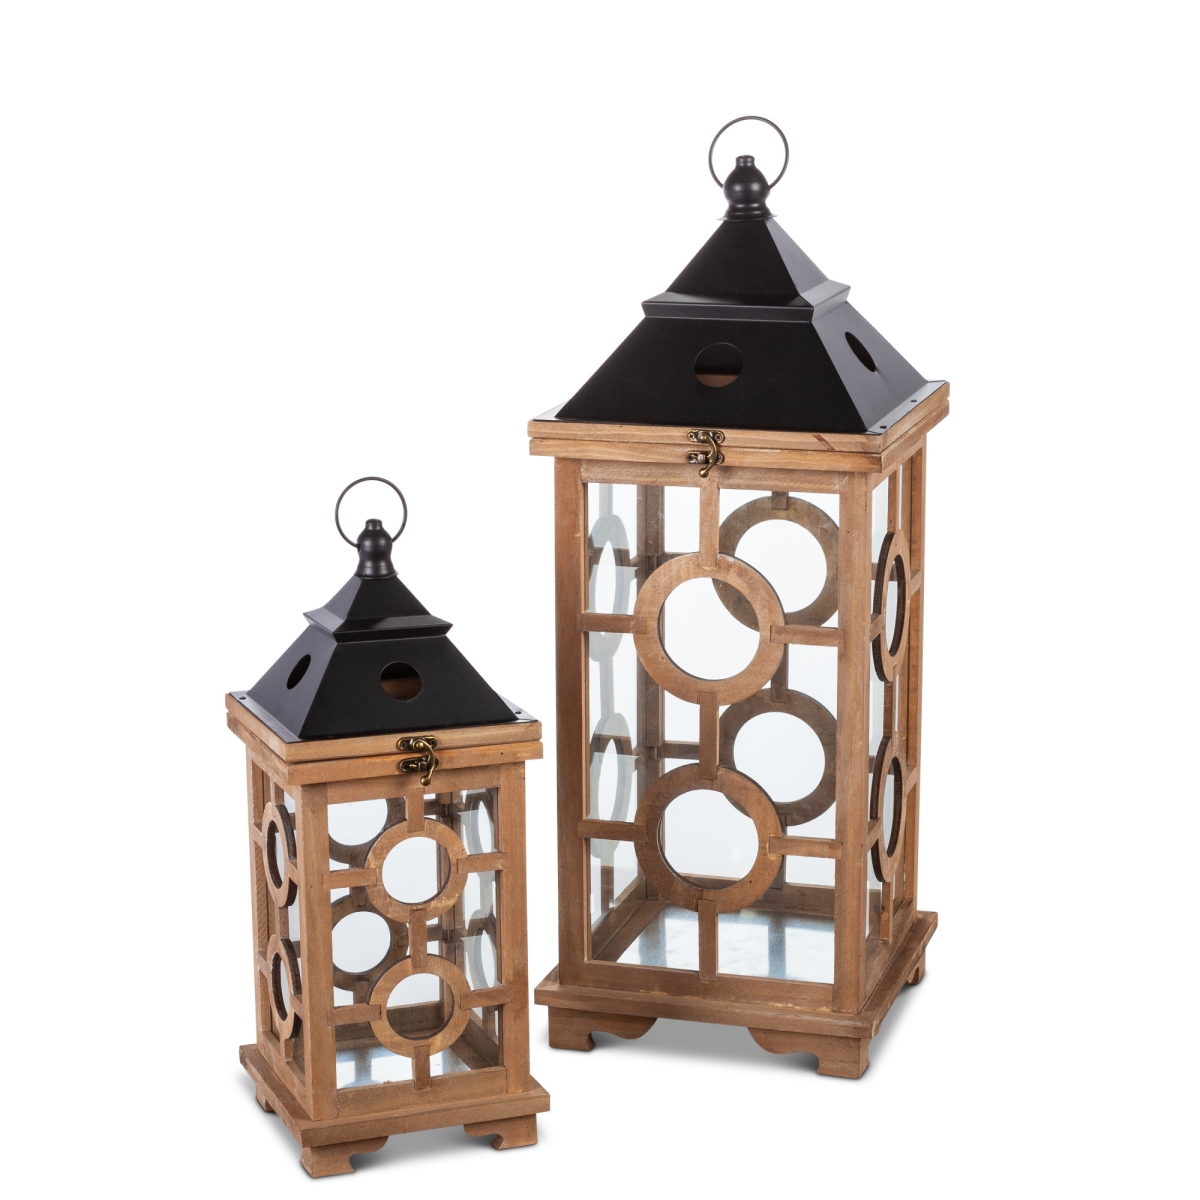 Gerson 44644ec Assorted-size Wood Lanterns With Stained Wood Finish & Black Metal Top - Brown - Set Of 2